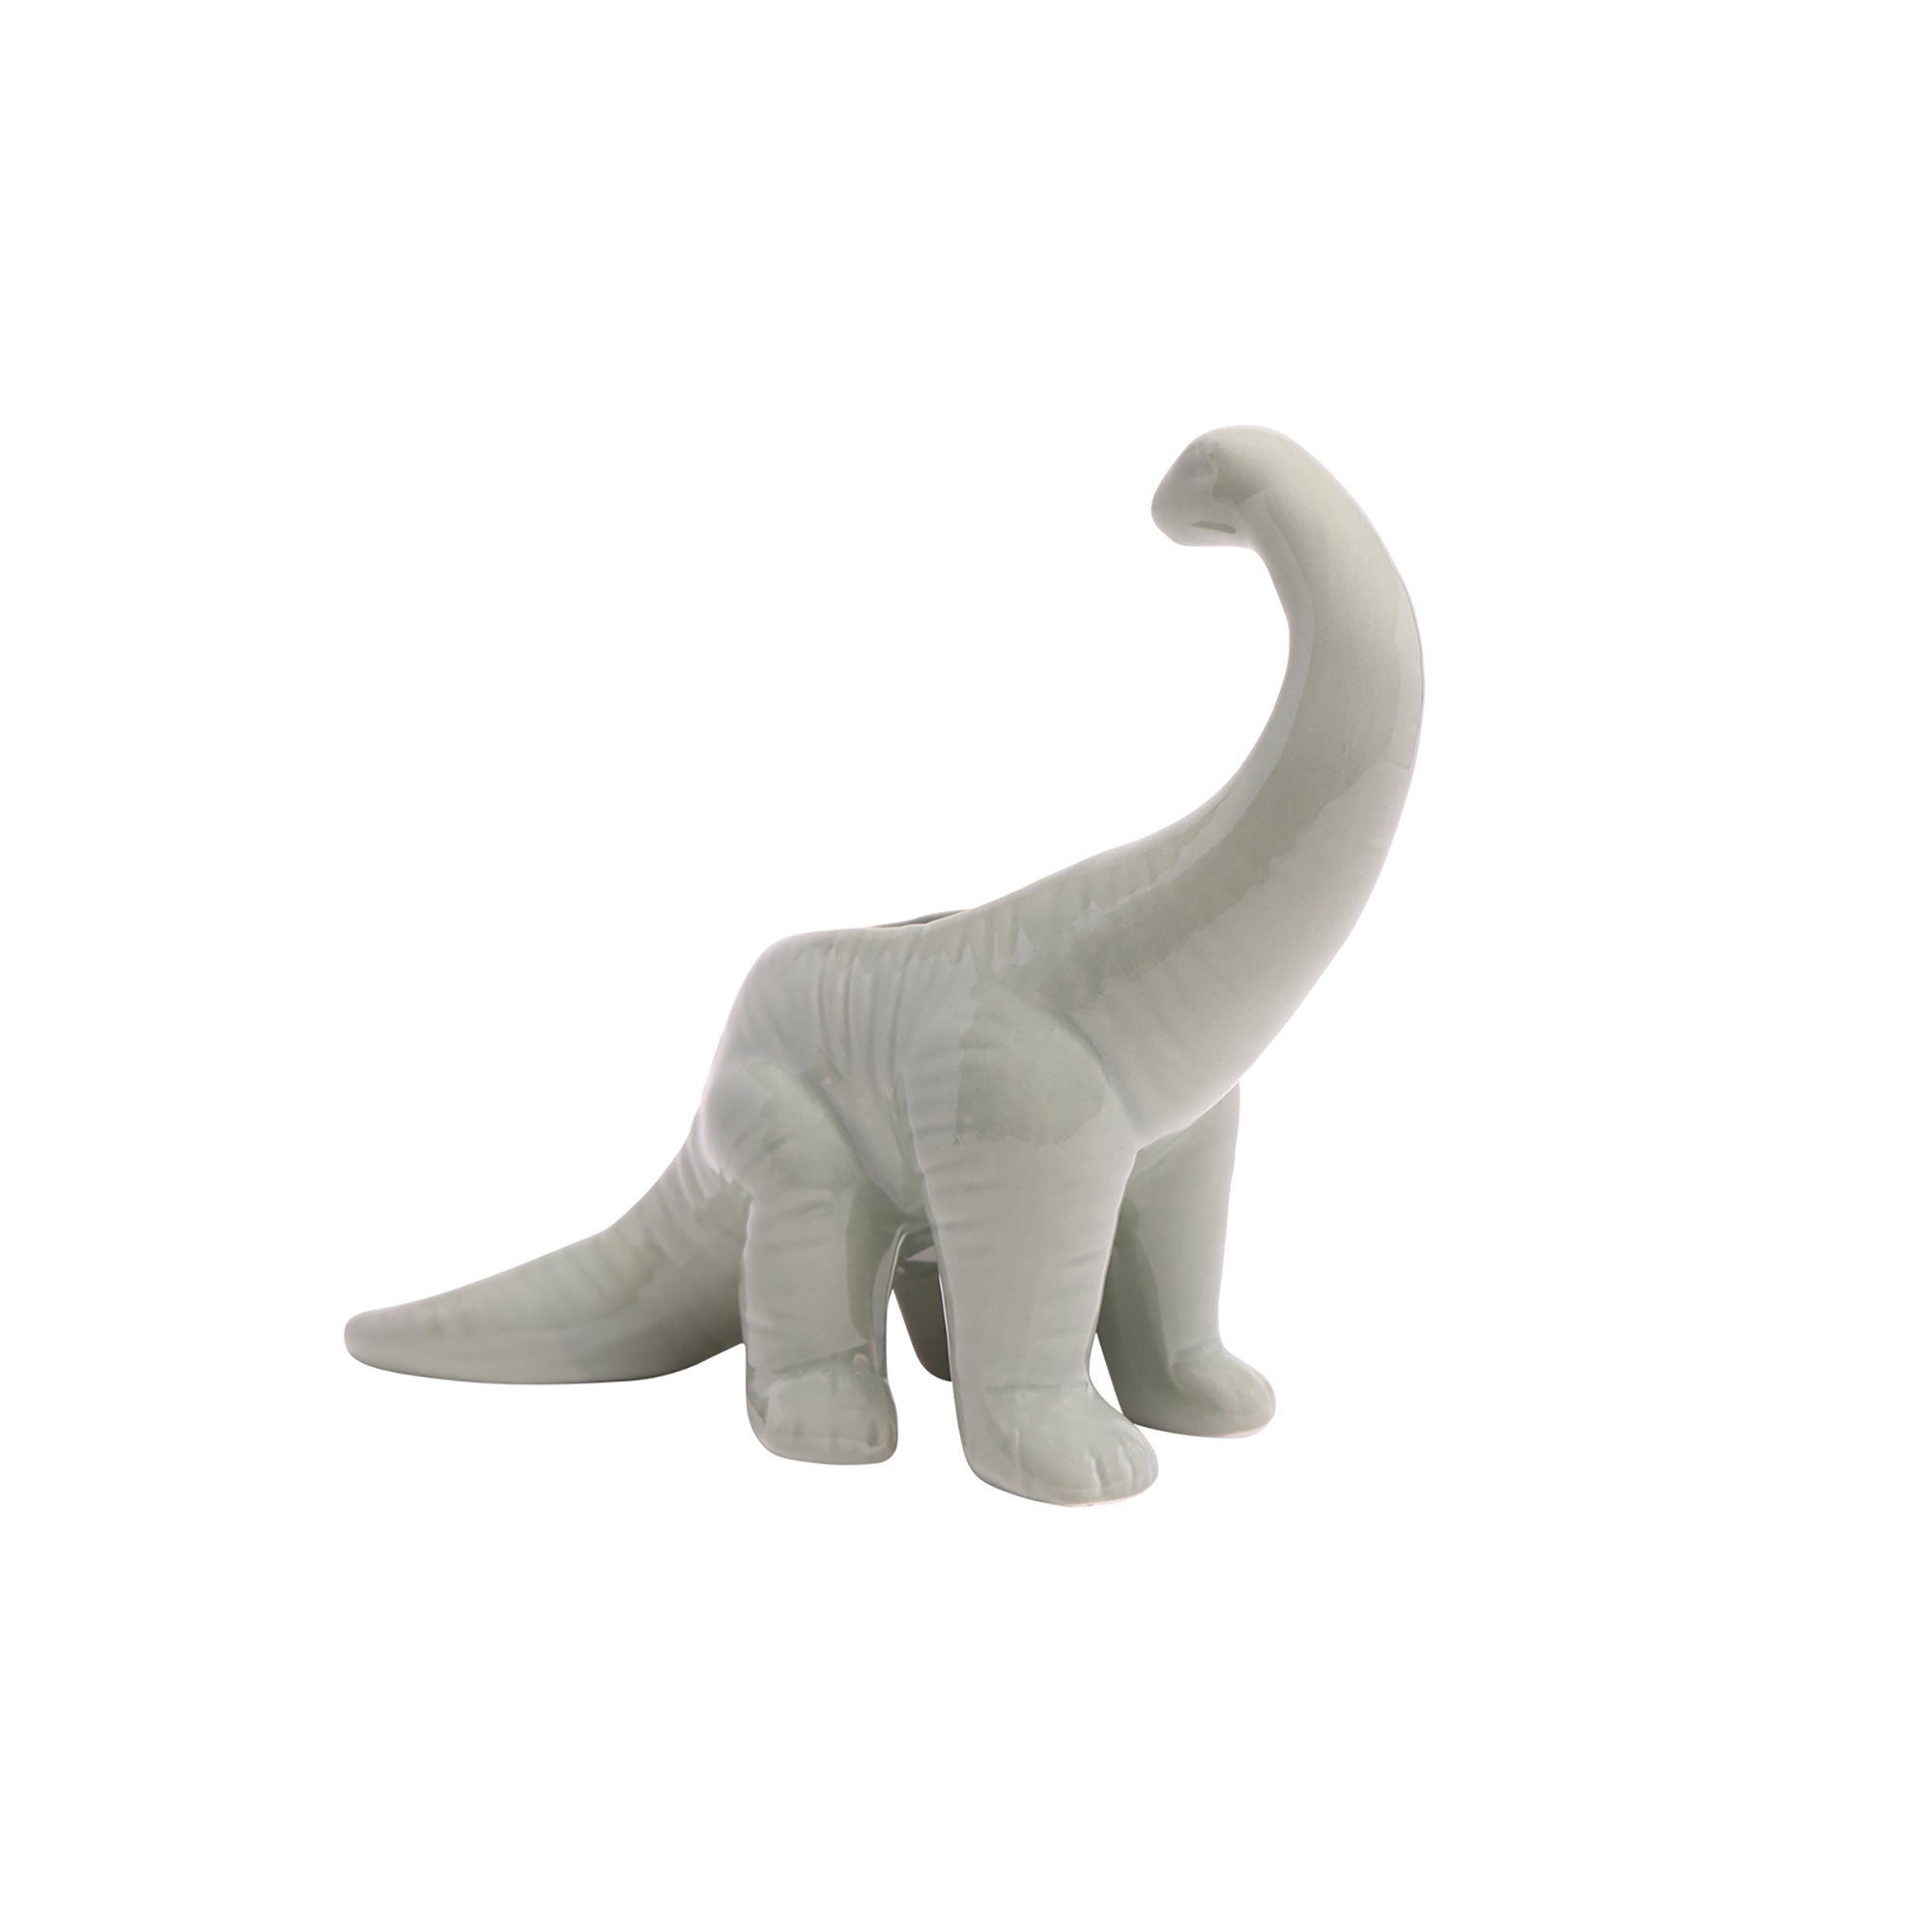 A Dinosaur Ceramic Indoor Plant Pot For Succulents, resembling a brachiosaurus, with a smooth, glossy finish, displayed against a white background, available for re-orders by Chive Studio 2024.